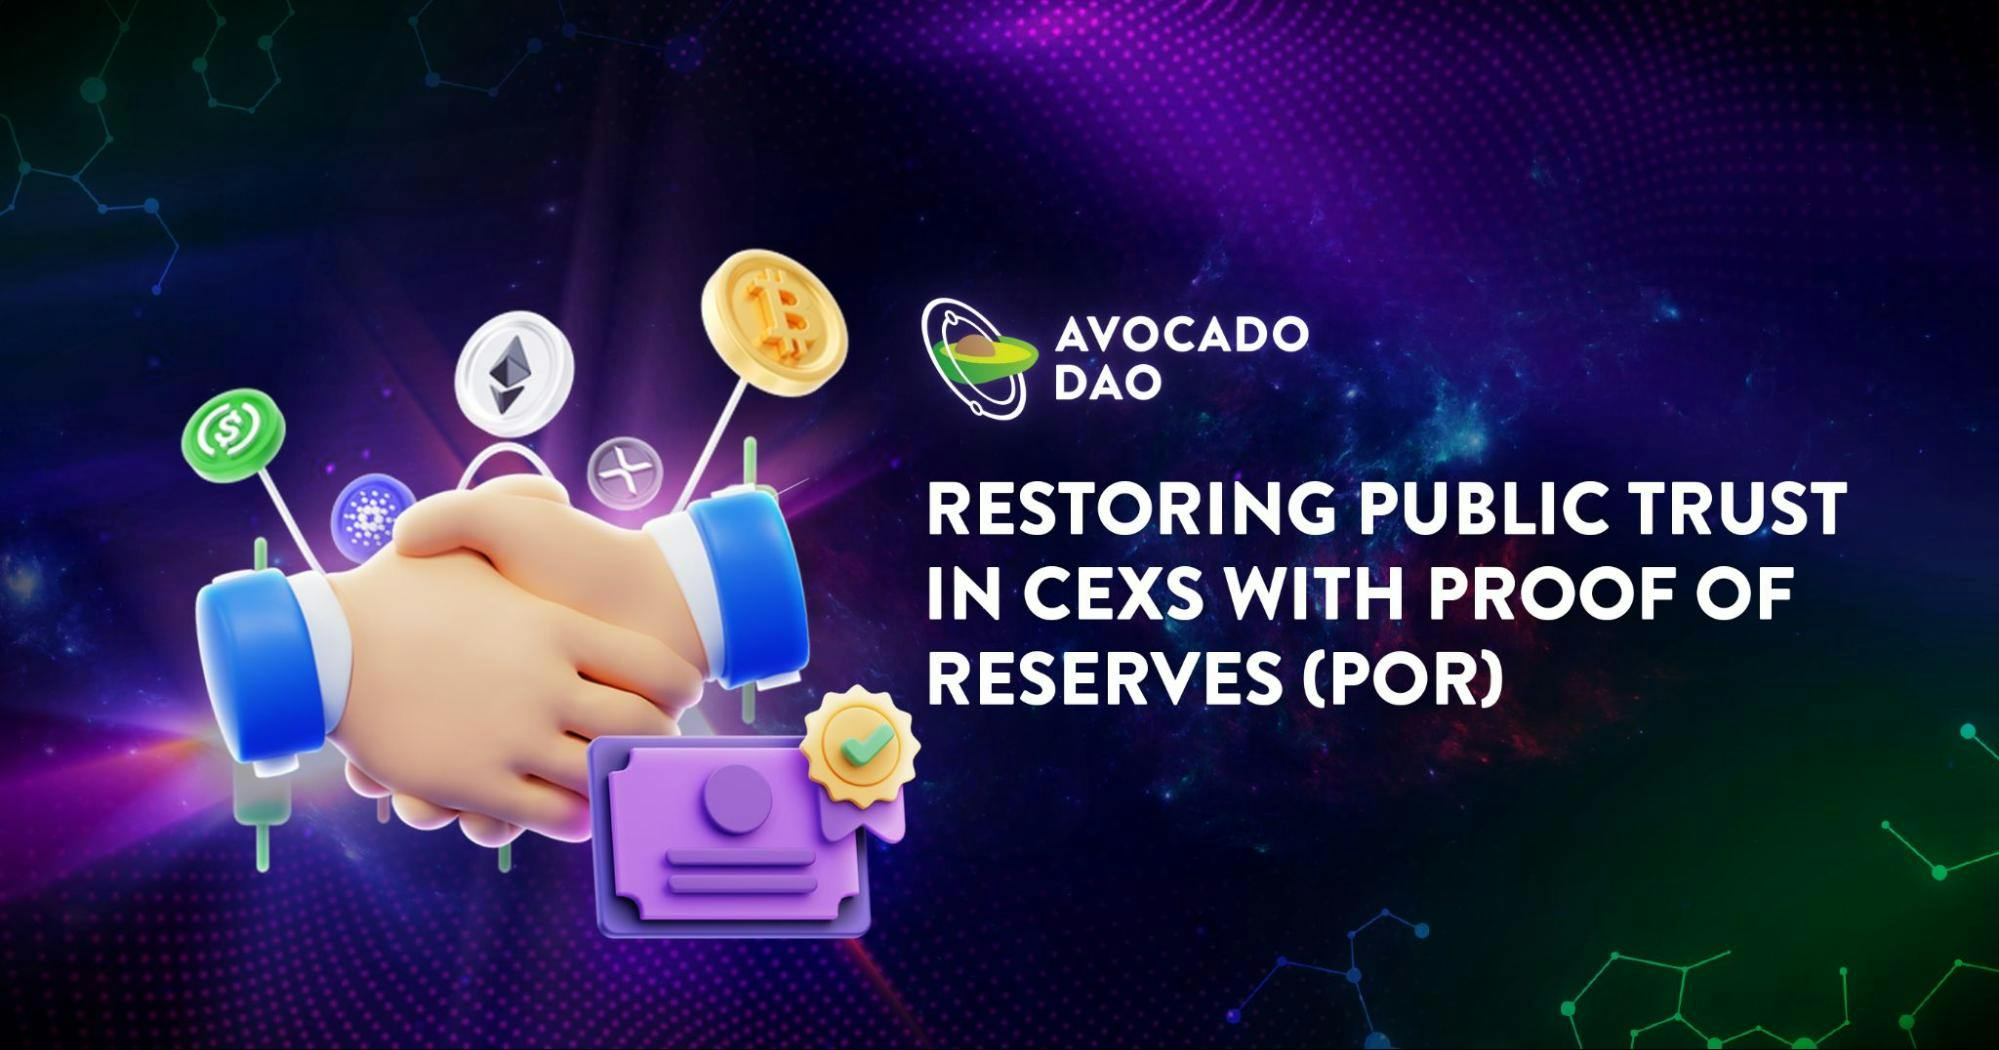 Restoring public trust in CEXs with Proof of Reserves (PoR)